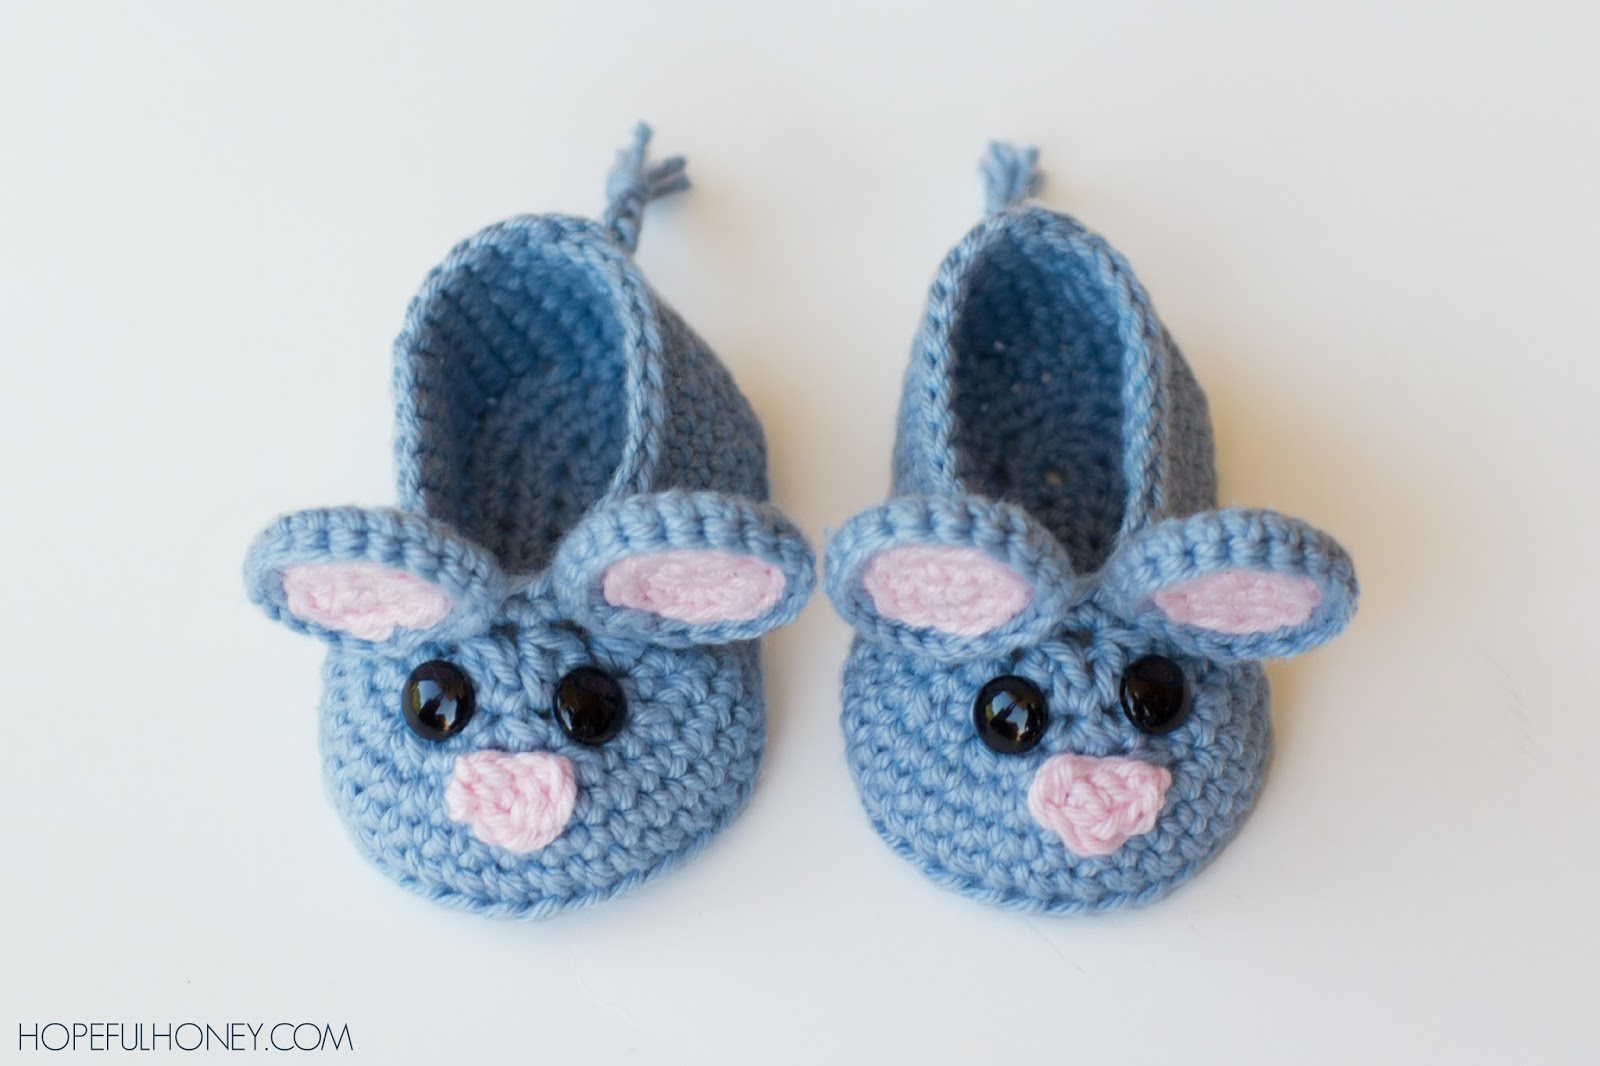 Knitted Baby Shoes Patterns Free Crochet Ba Animal Booties With Free Patterns